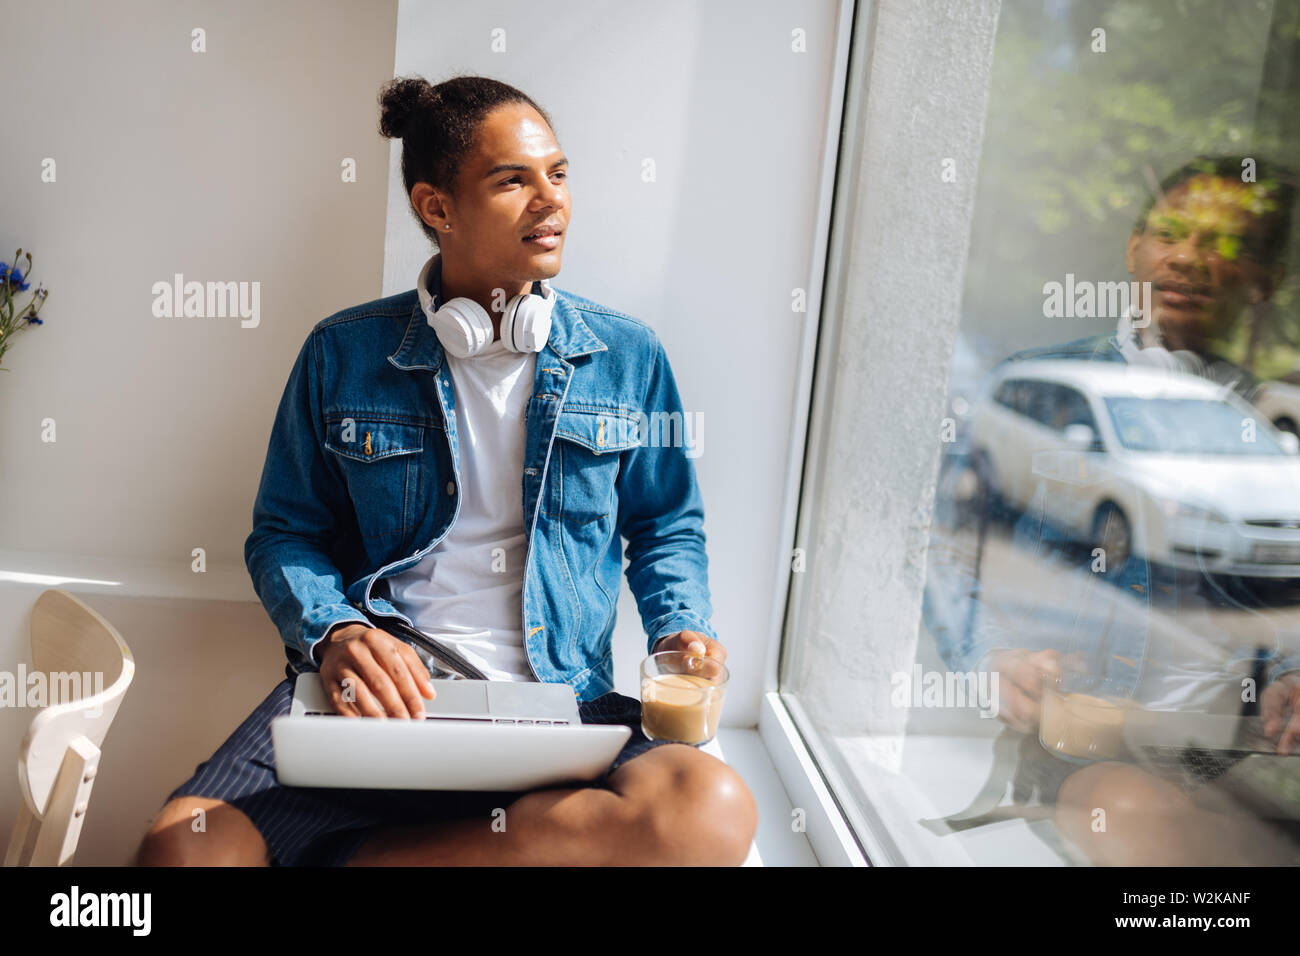 Dreamy mood. Kind male person holding laptop on knees while enjoying view from window Stock Photo